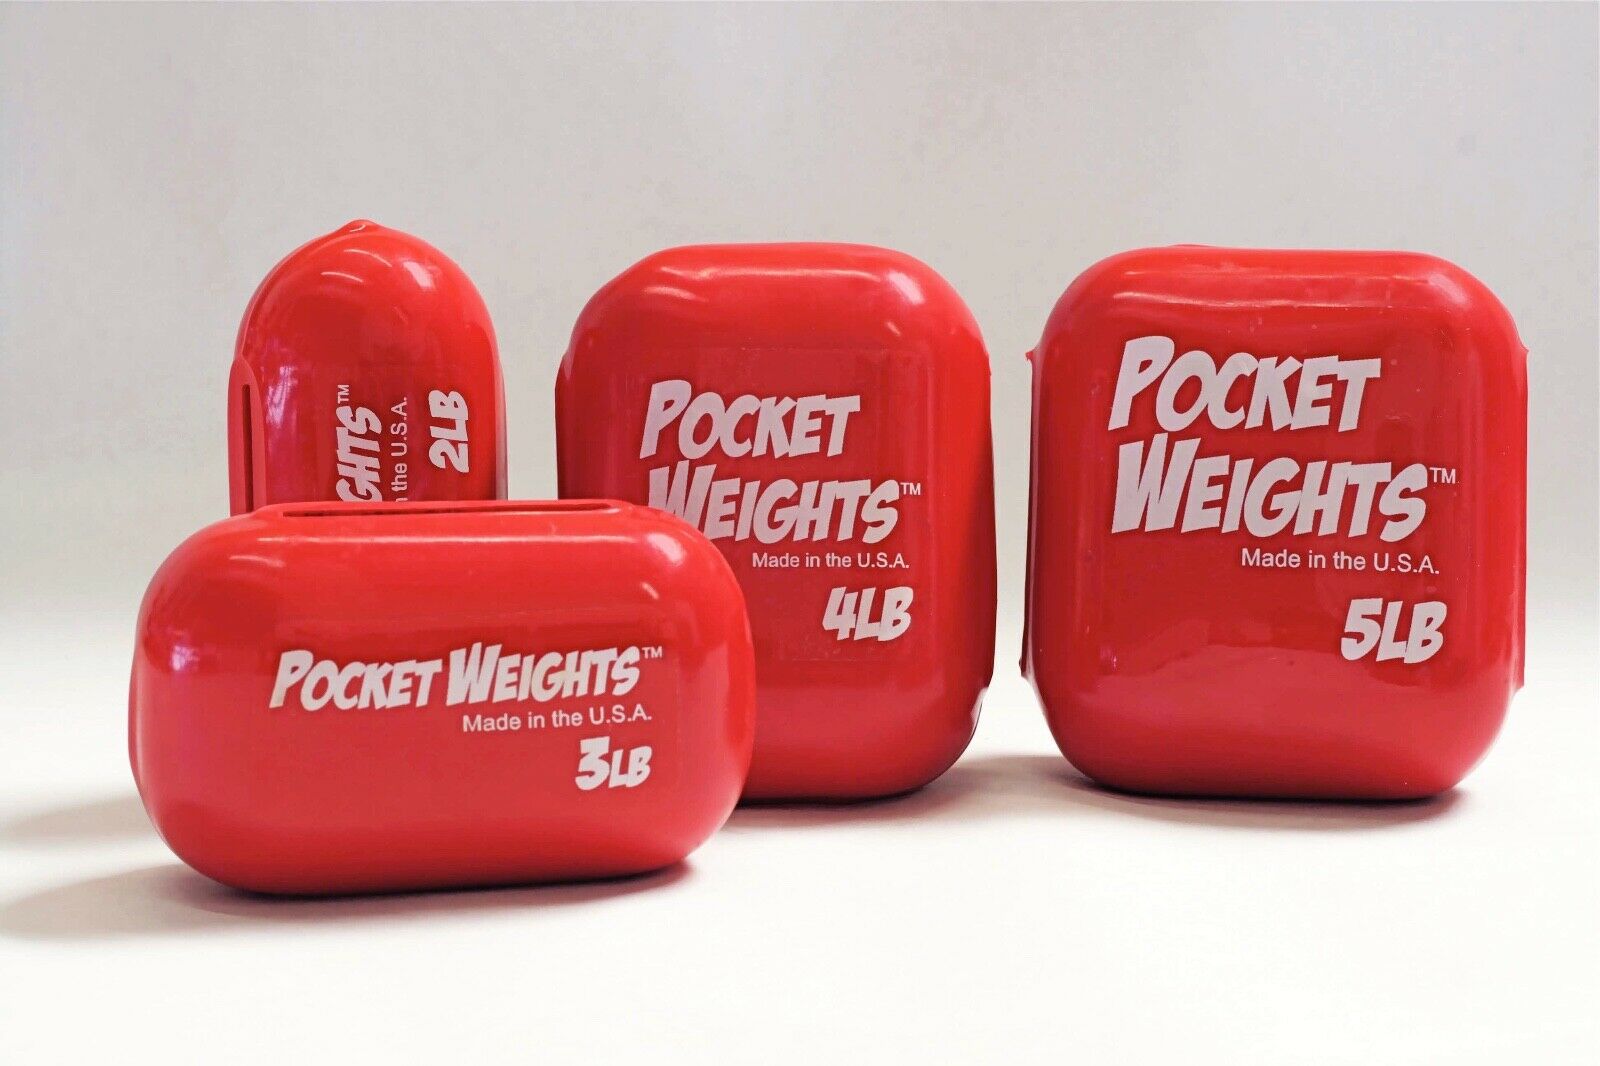 Pocket Weights Bcd And Belt Scuba Diving Weights. Usps Priority Shipping.